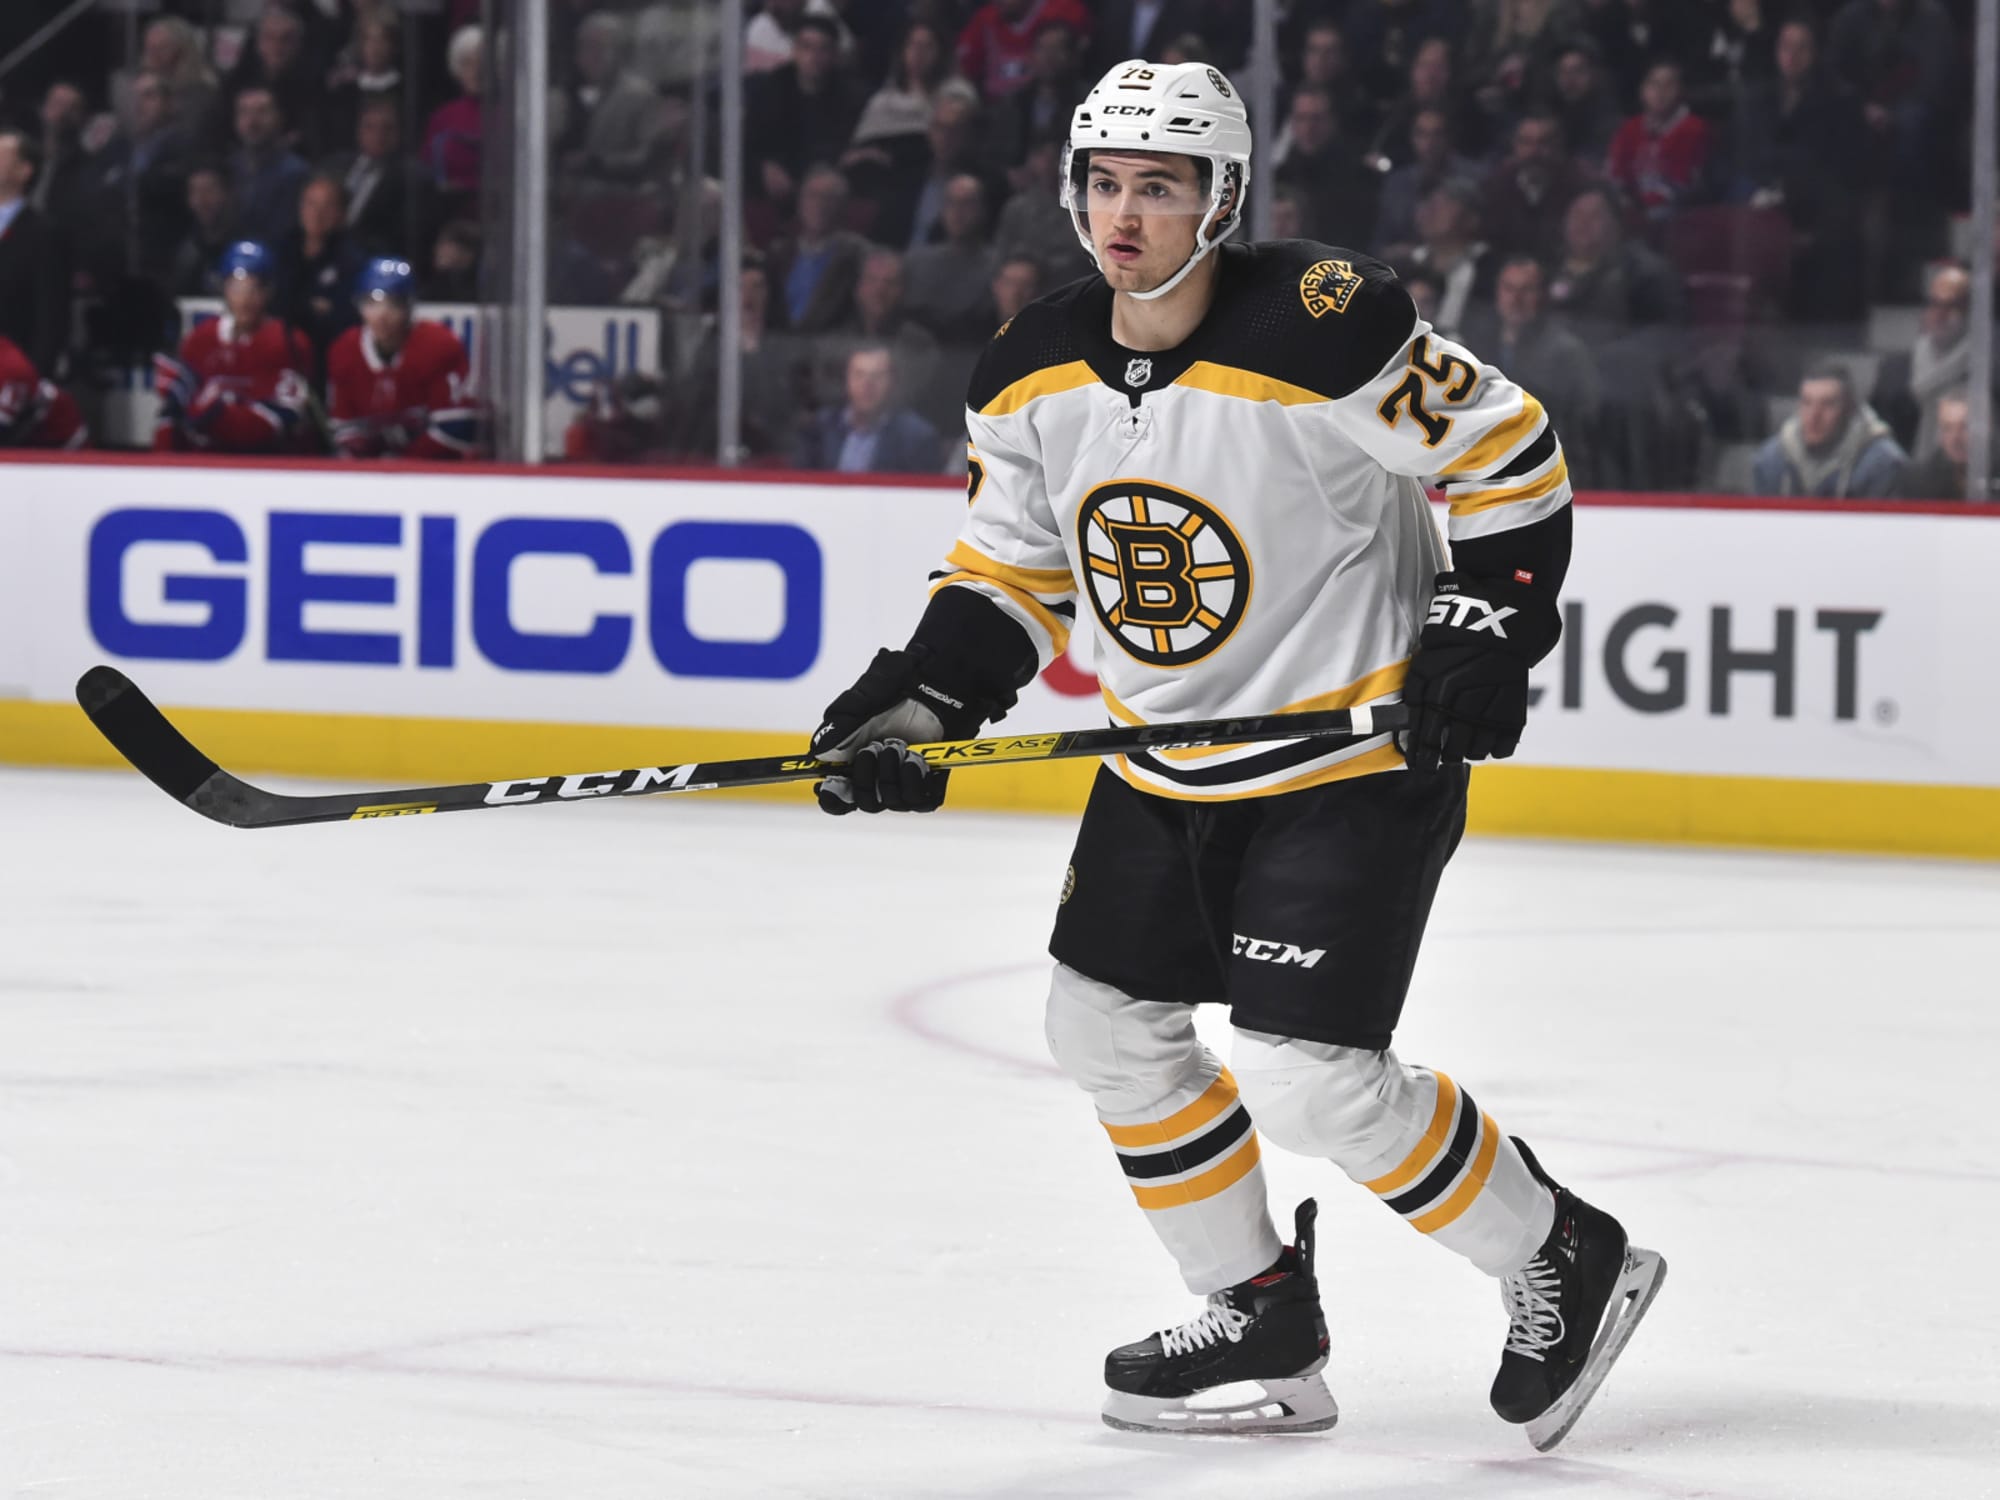 Boston Bruins: What does Kevan Miller's return mean for Connor Clifton?